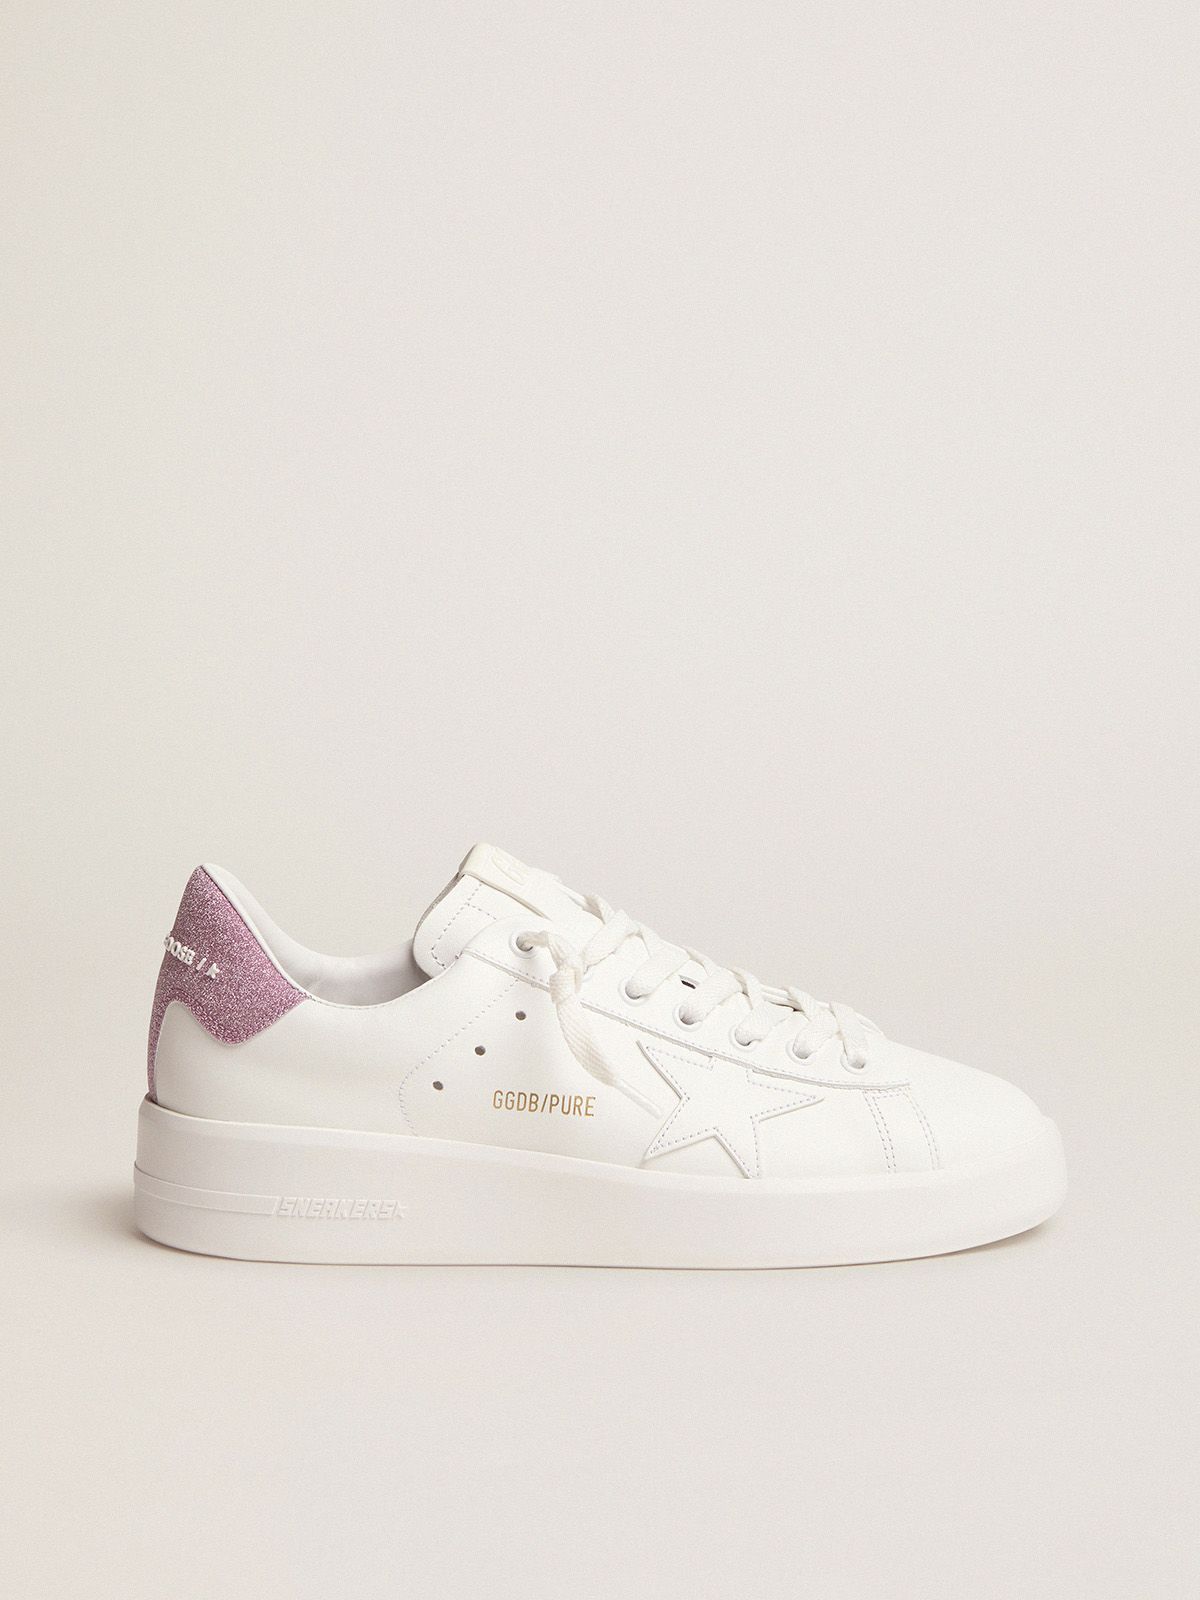 golden goose tab with heel glitter leather Purestar sneakers in white pink